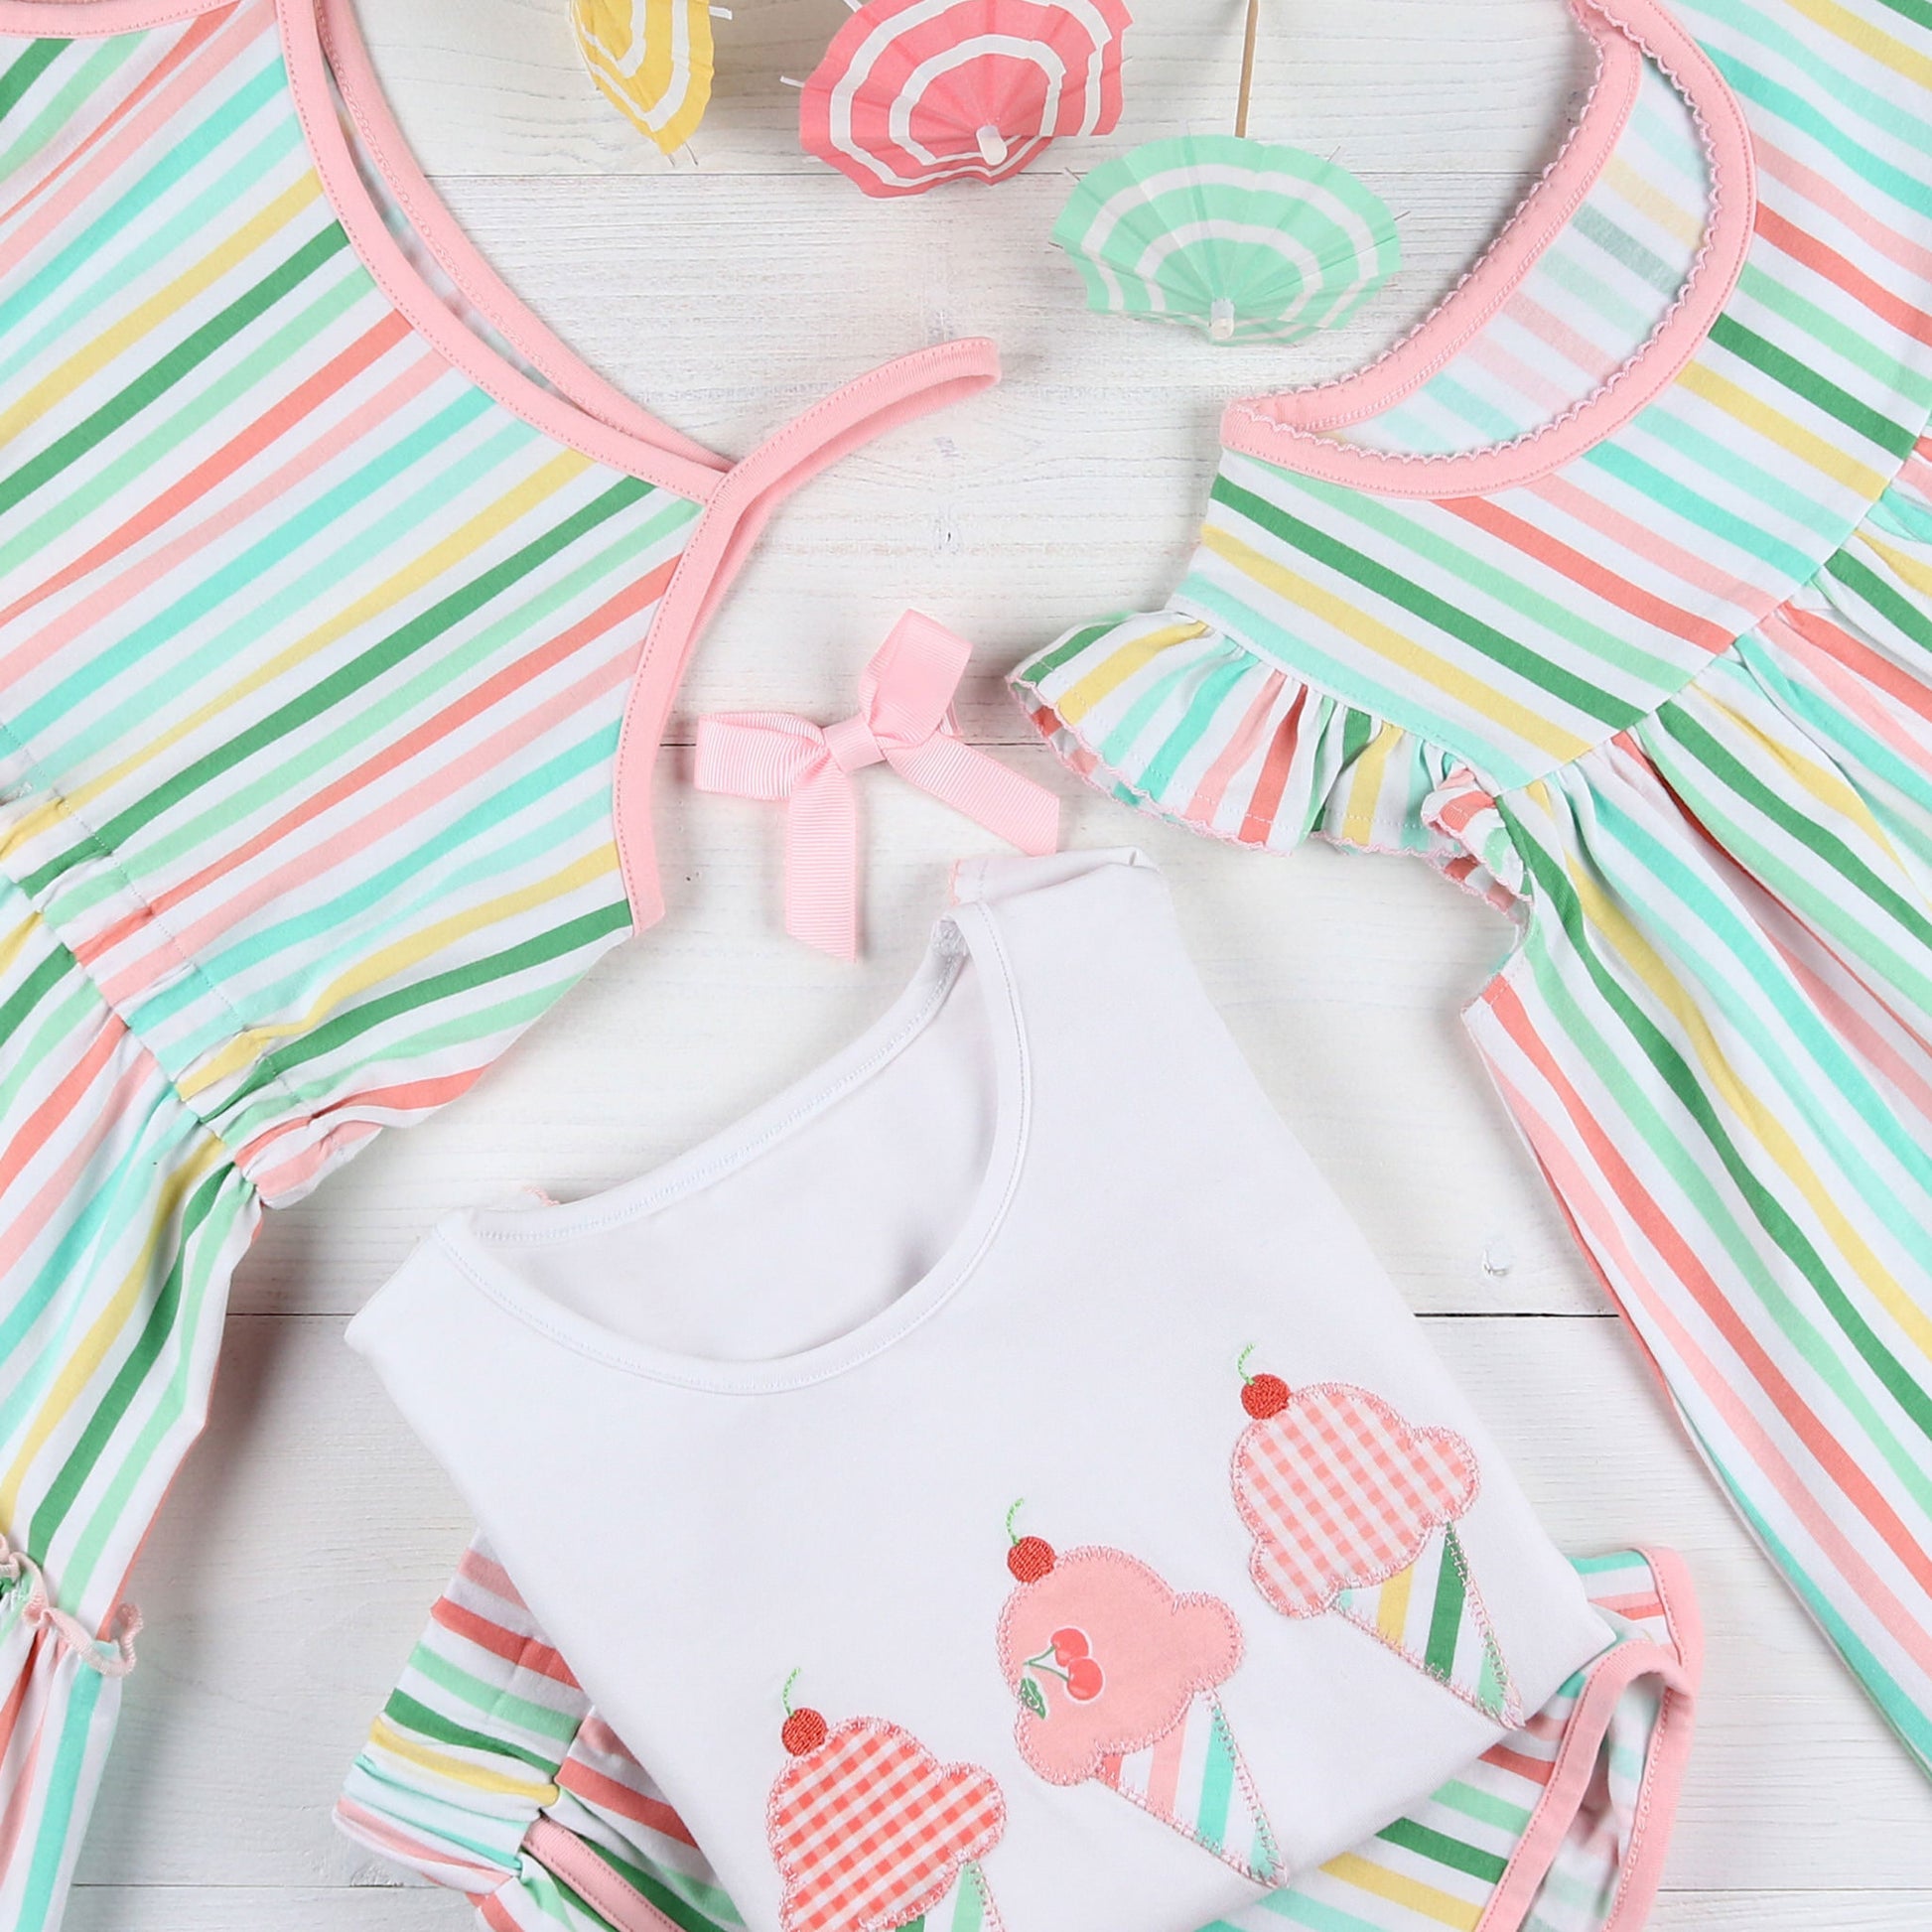 Girls Ice Cream Applique Top, striped shirt and striped dress flatlay